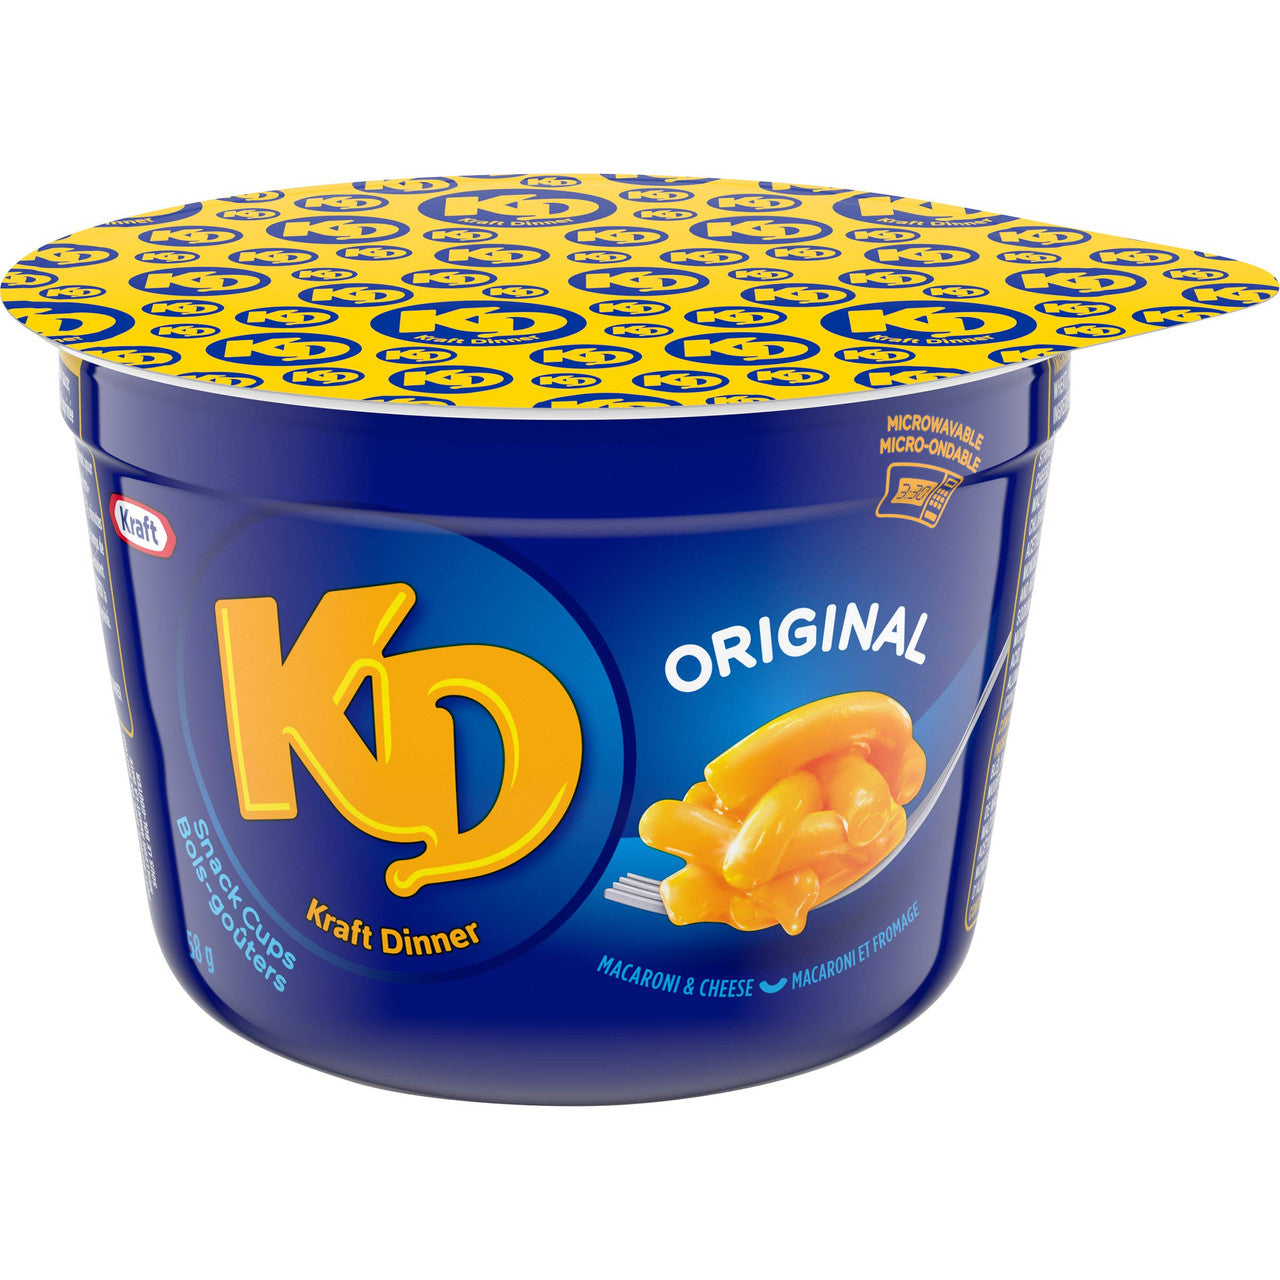 KD KRAFT DINNER Snack Cups - Original Macaroni & Cheese 58g,10ct, (Imported from Canada)